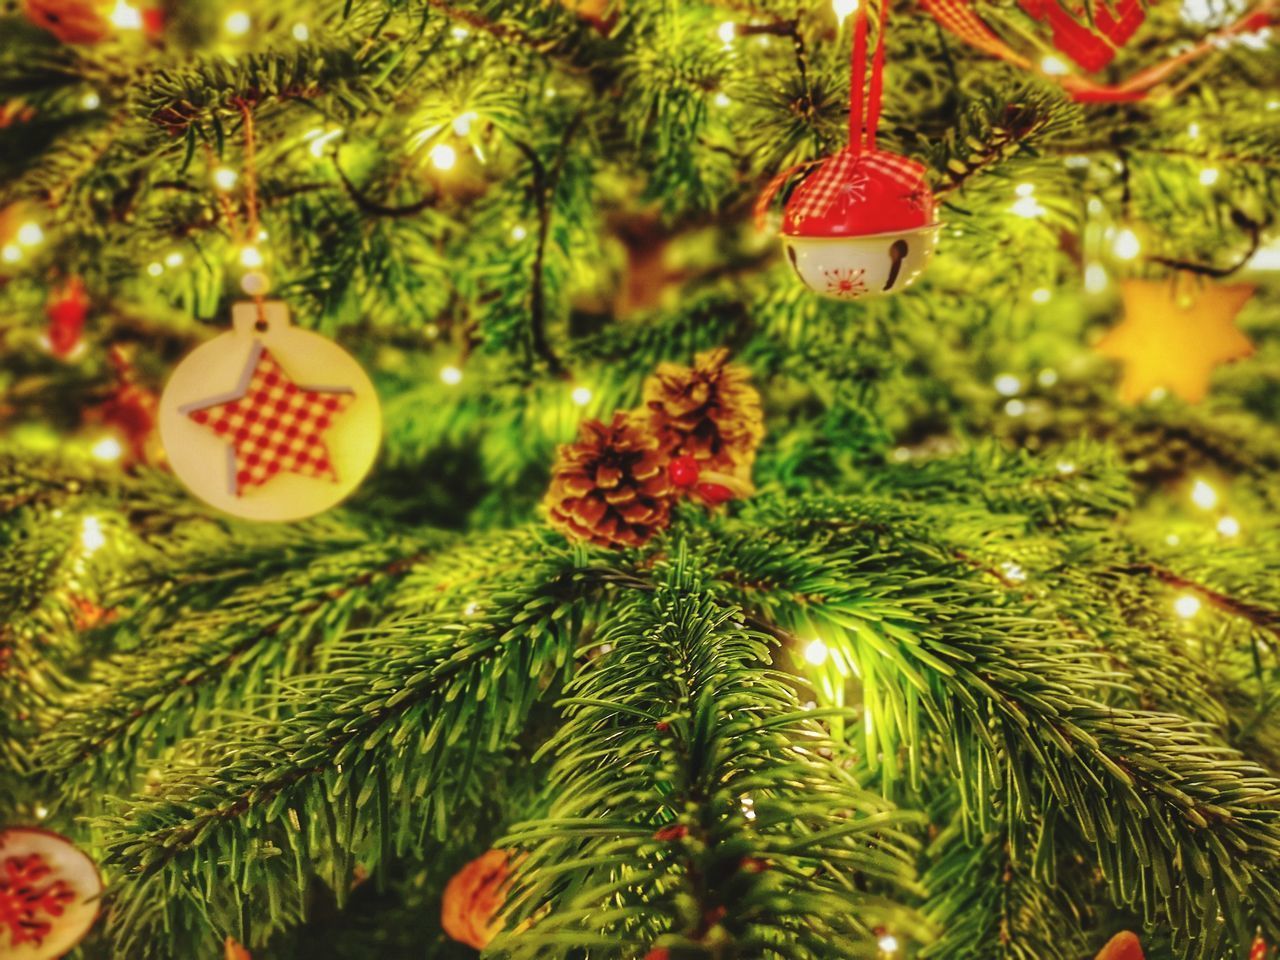 CLOSE-UP OF CHRISTMAS TREE WITH LEAVES